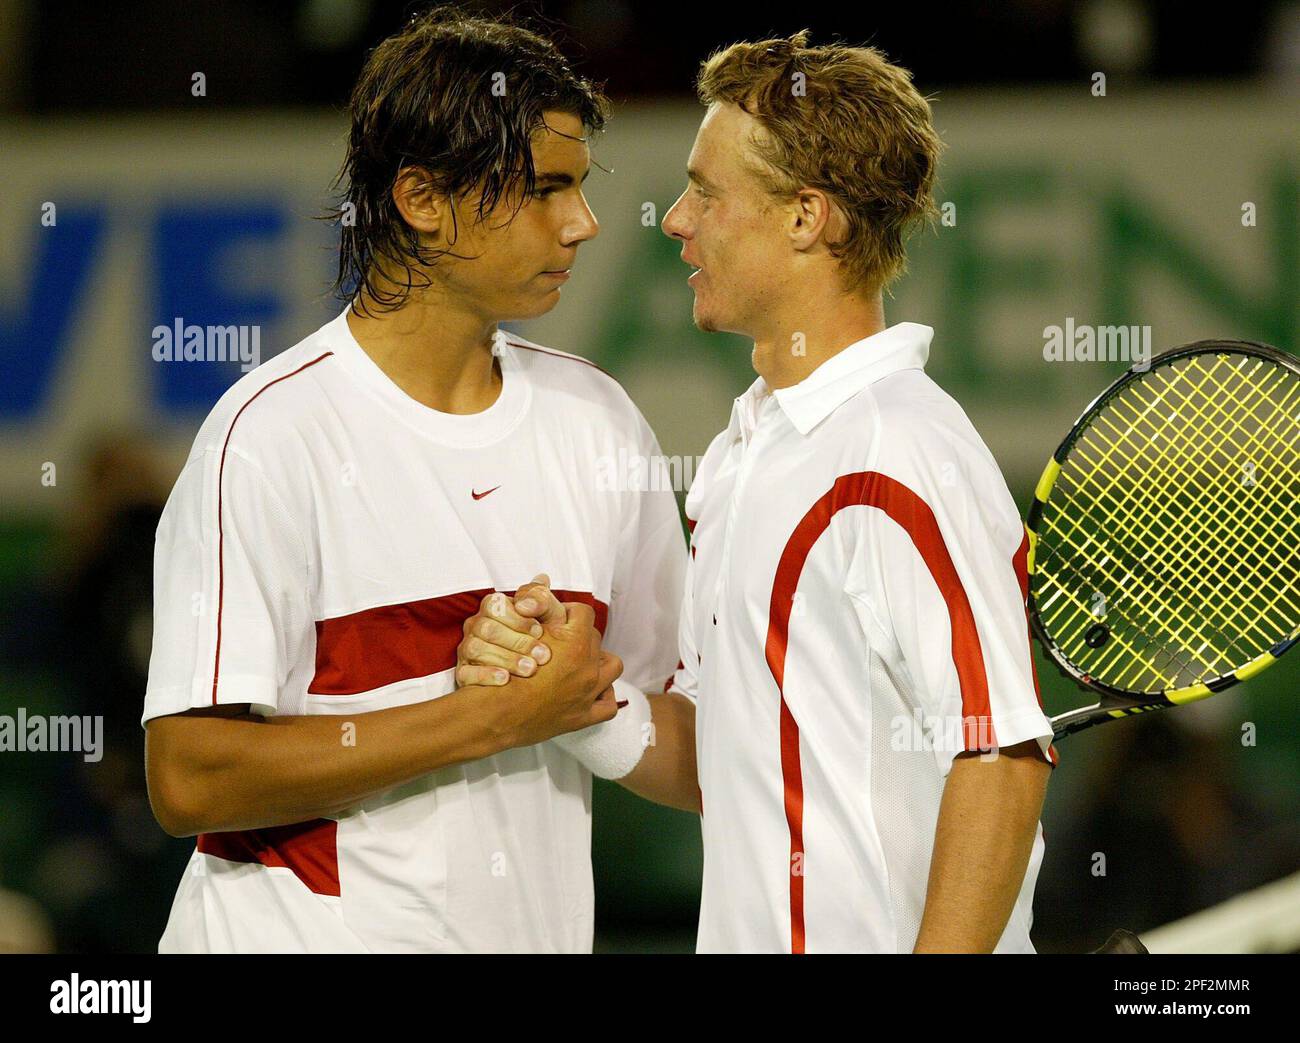 Australia's Lleyton Hewitt, right, is congratulated by Spain's Rafael Nadal  after their third round match at the Australian Open in Melbourne,  Australia, Saturday, Jan. 24, 2004. Hewitt won the match 7-6, 7-6,